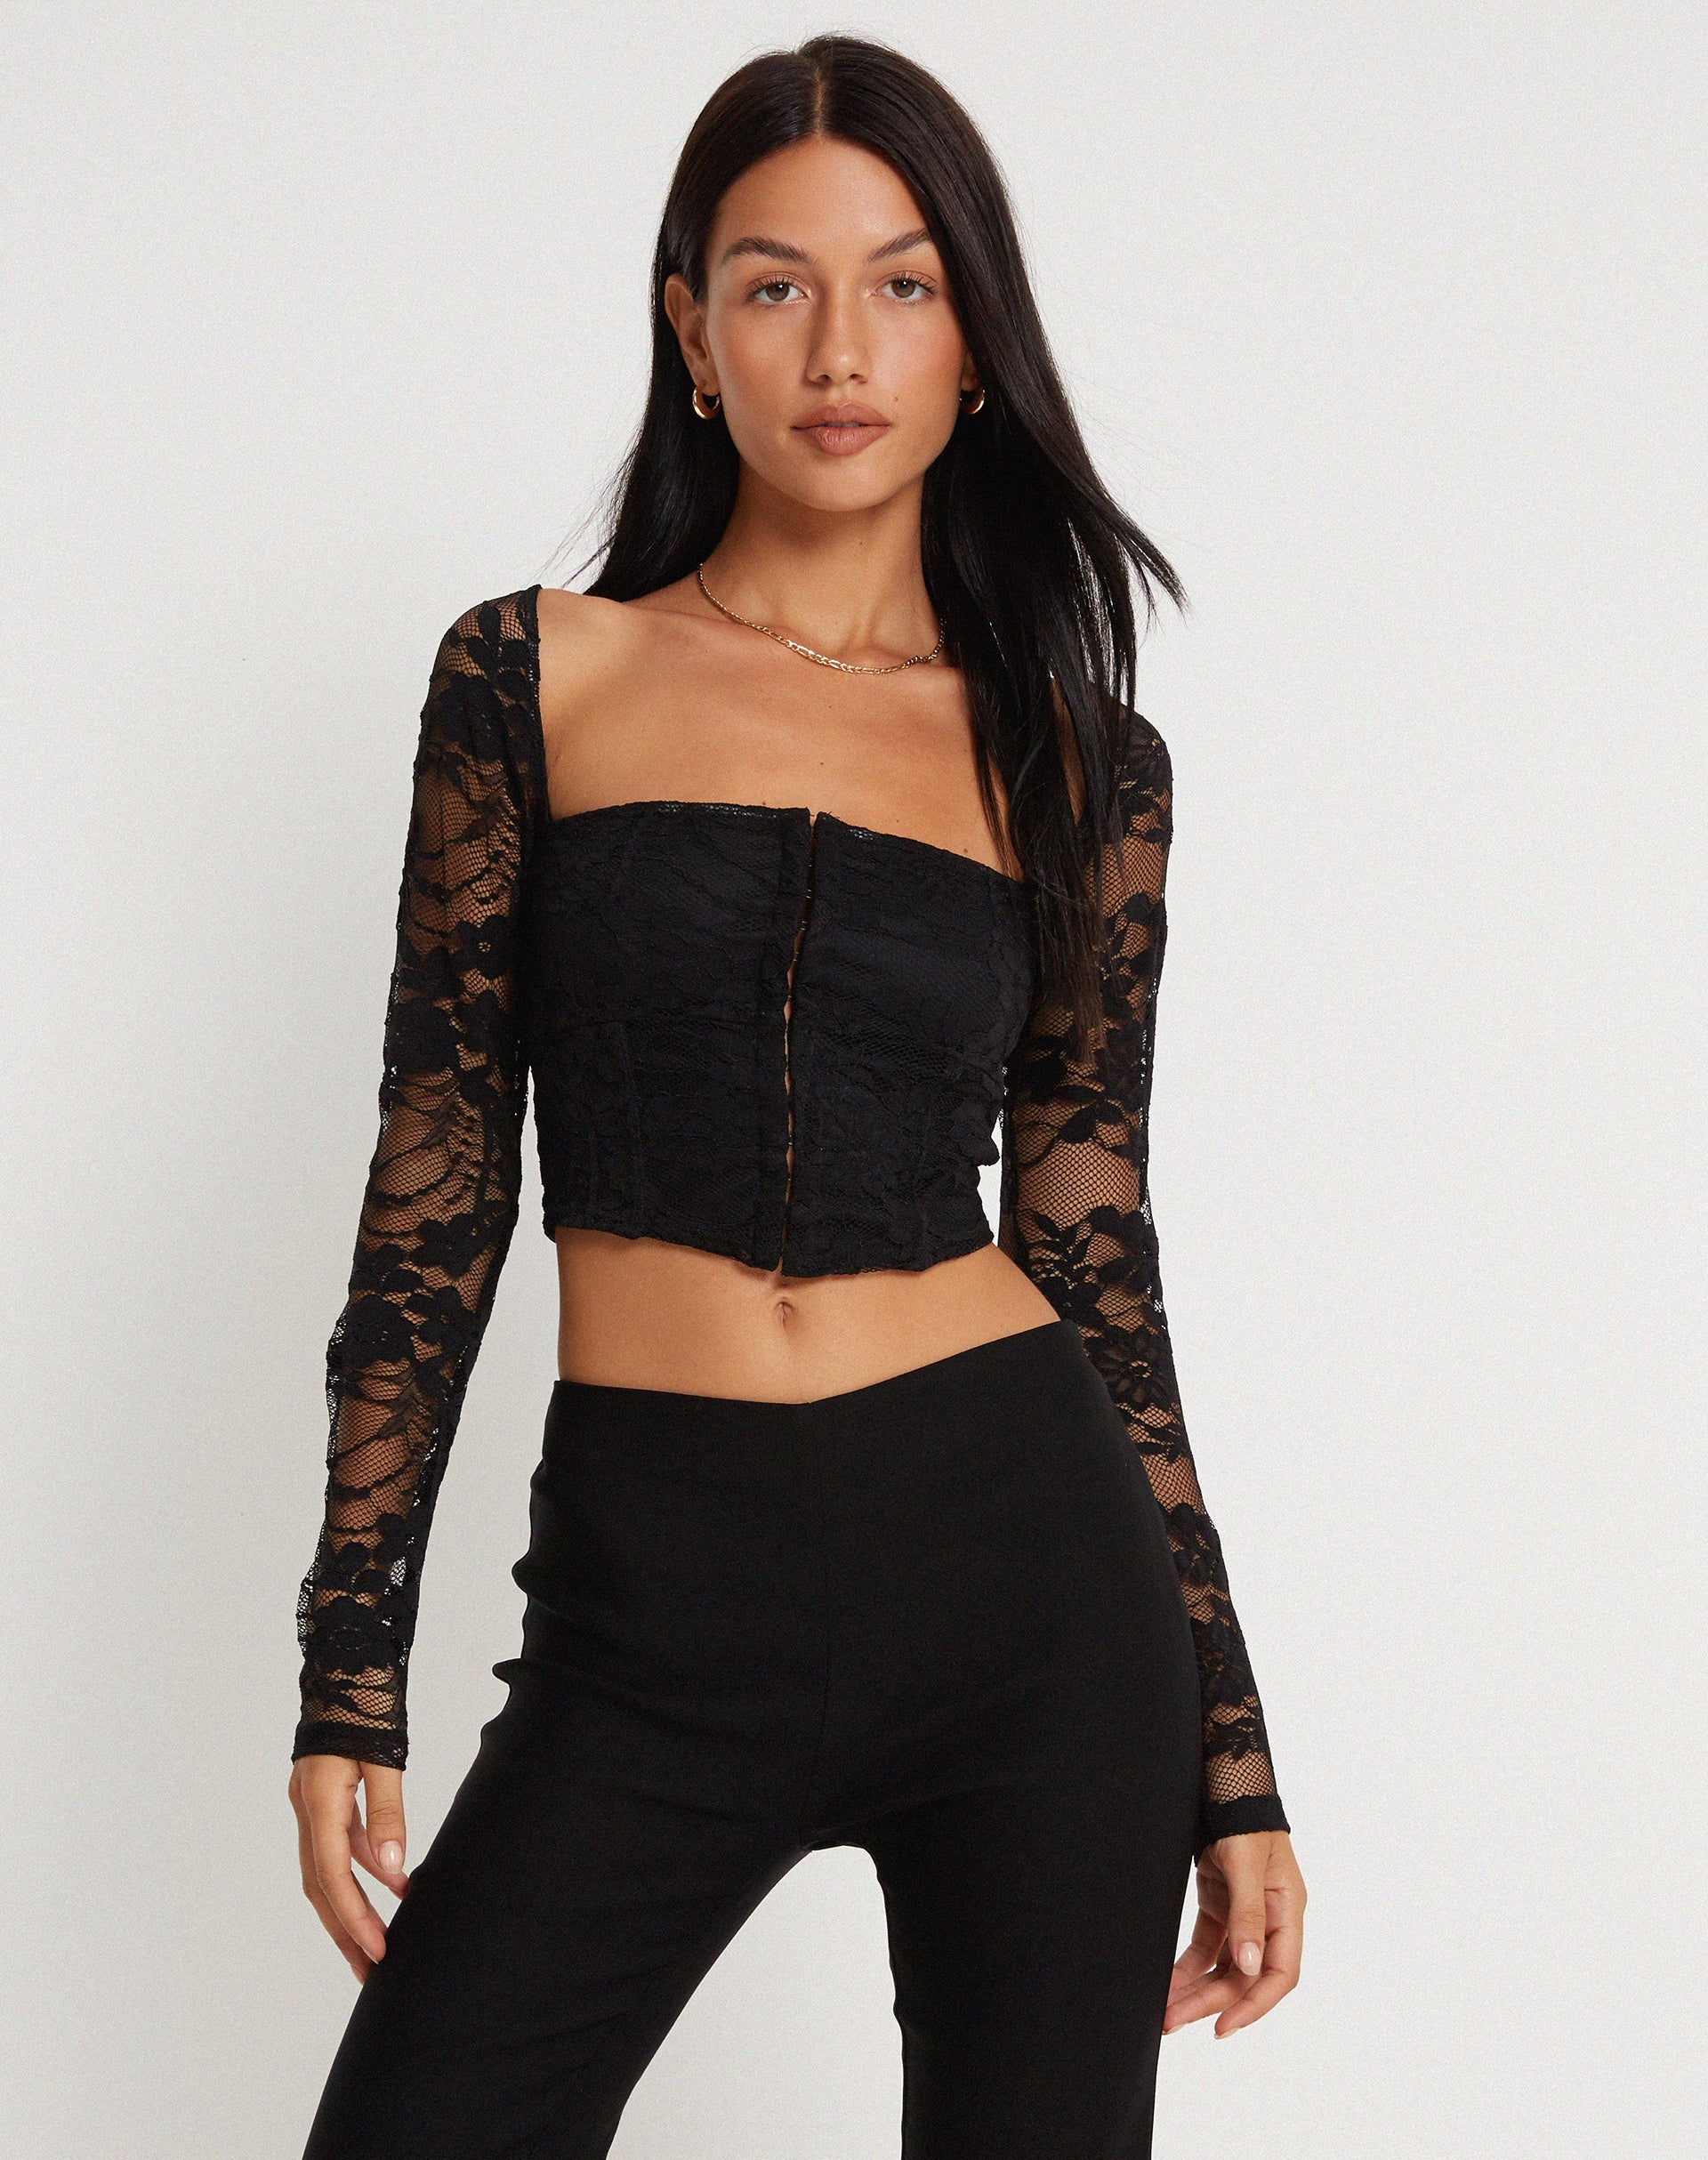 Lainey Unlined Long Sleeve Top in Black Lace